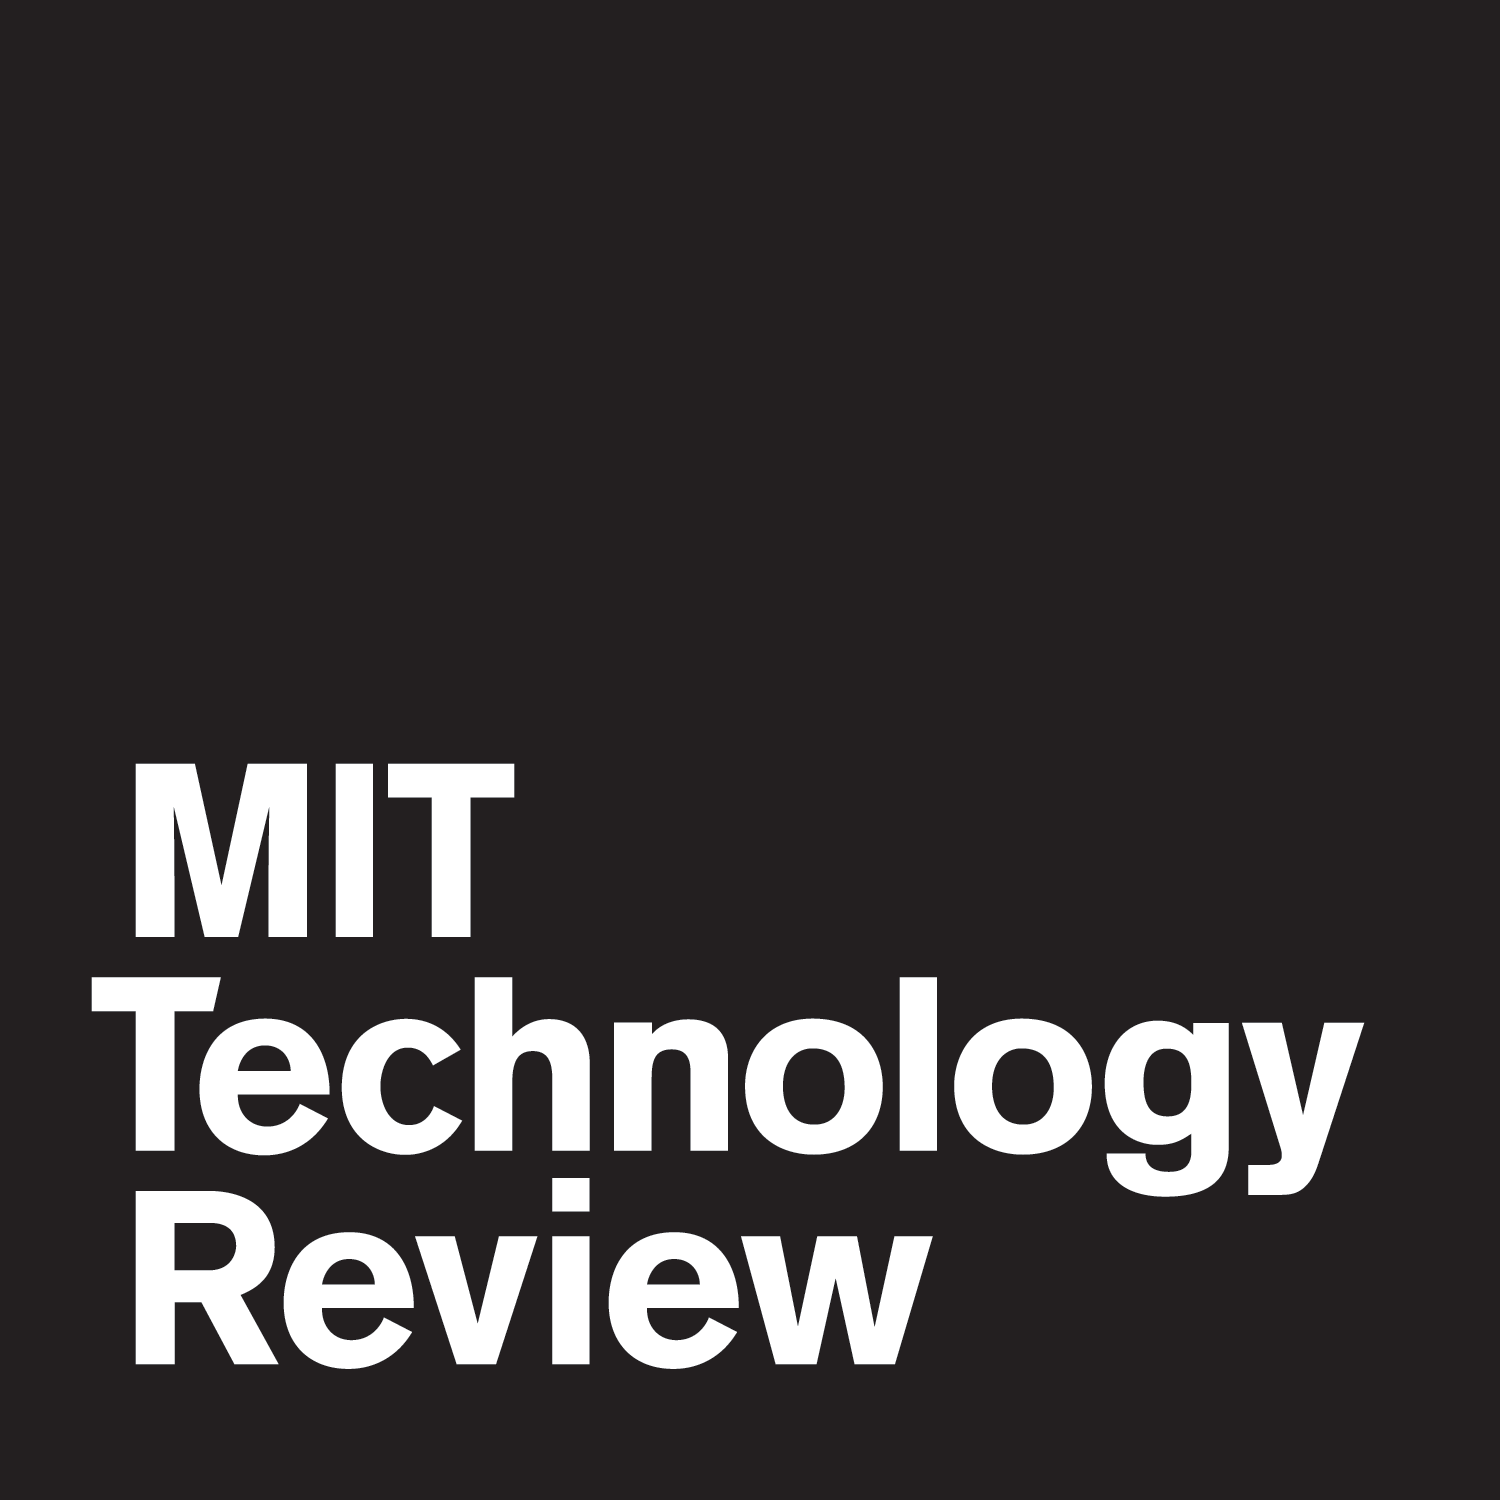 MIT Technology Review is now on Disqus!